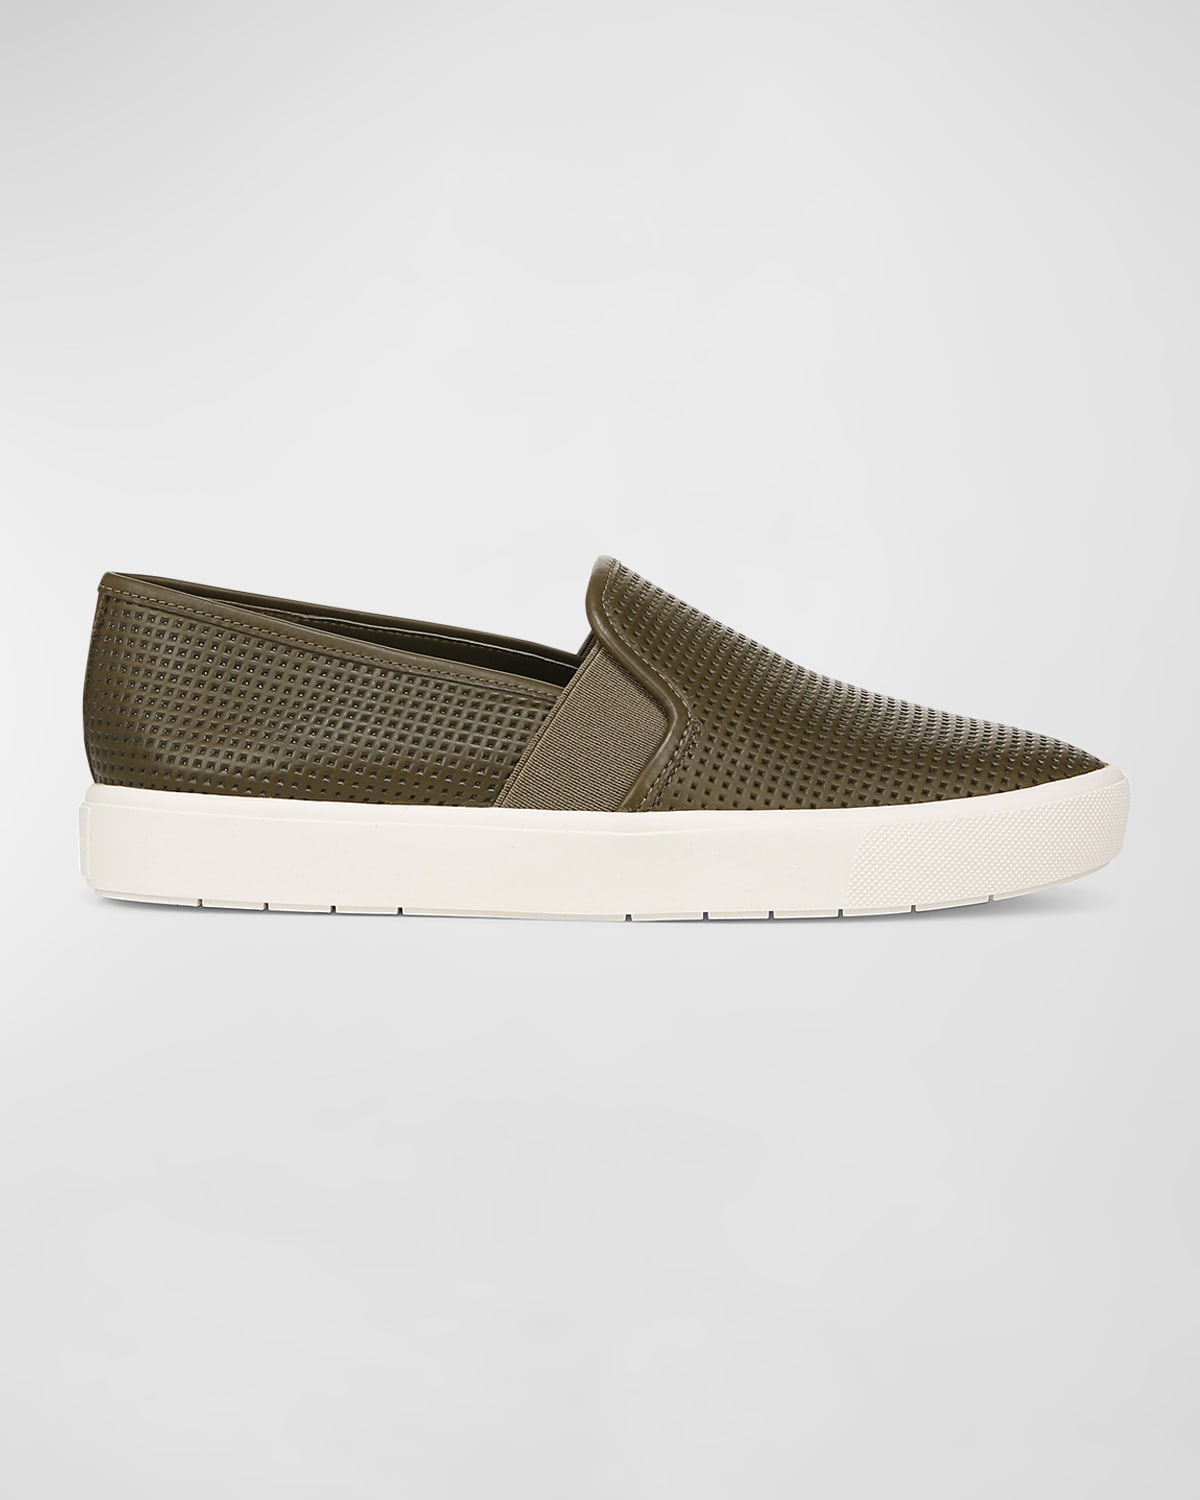 VINCE BLAIR PERFORATED LEATHER SLIP-ON SNEAKERS